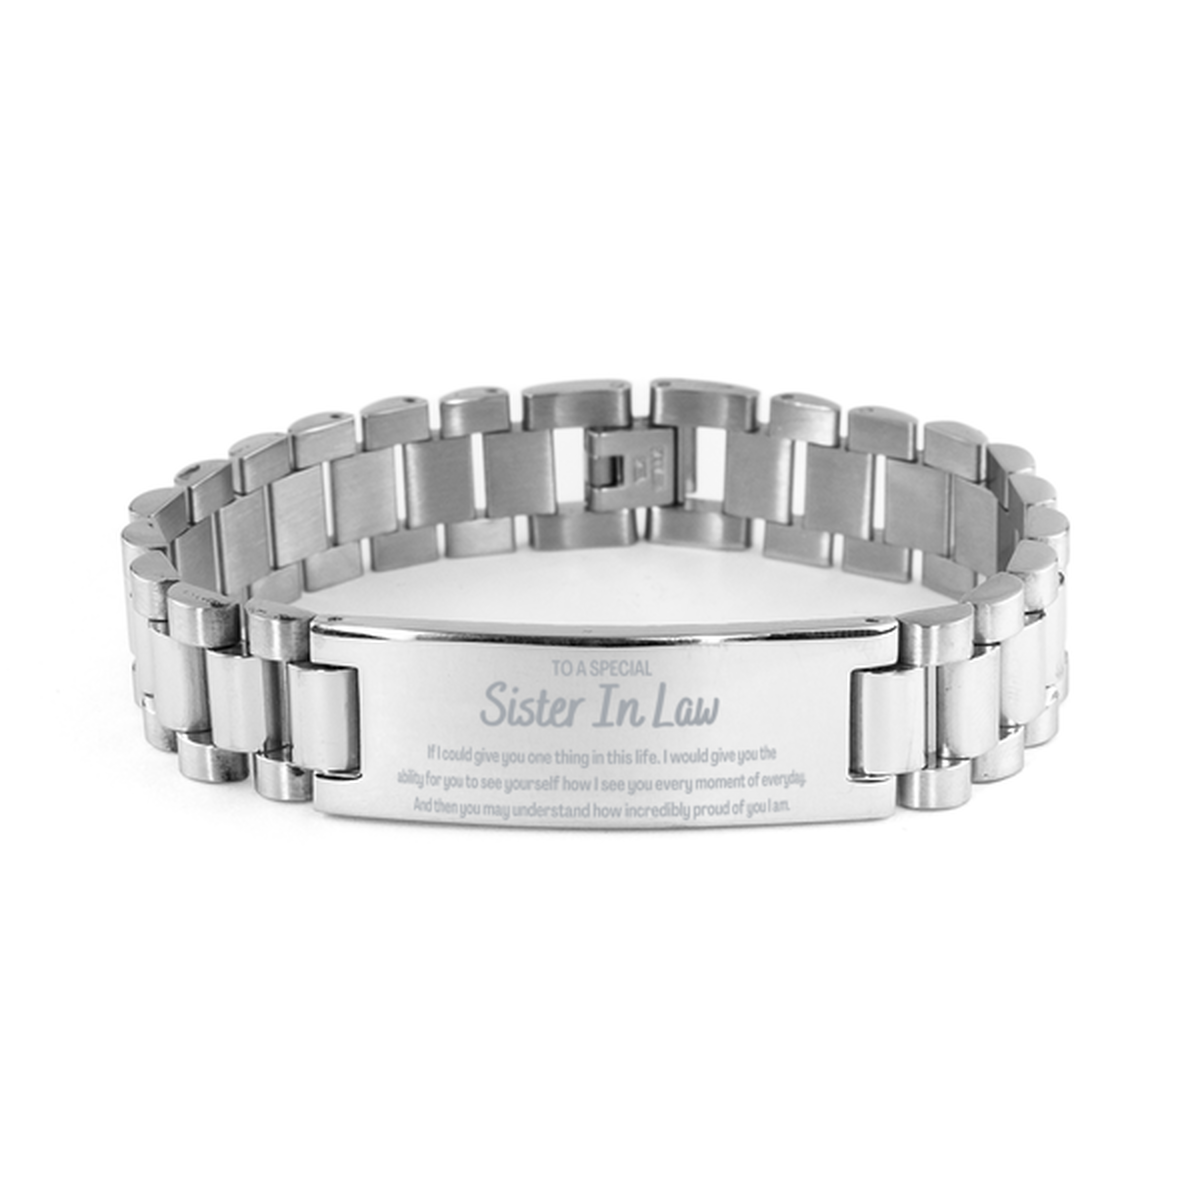 To My Sister In Law Ladder Stainless Steel Bracelet, Gifts For Sister In Law Engraved, Inspirational Gifts for Christmas Birthday, Epic Gifts for Sister In Law To A Special Sister In Law how incredibly proud of you I am